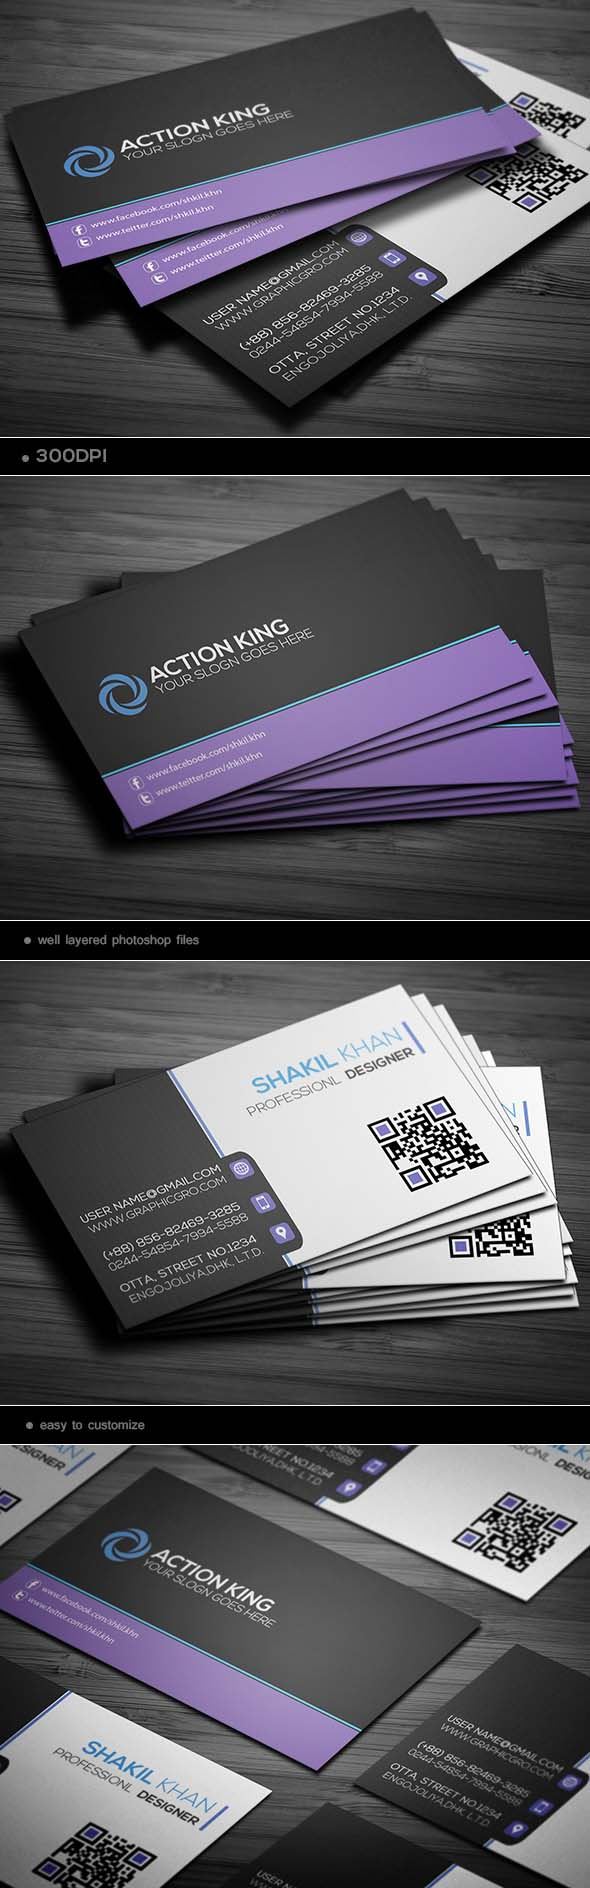 Download Free Printable Templates for Business Cards